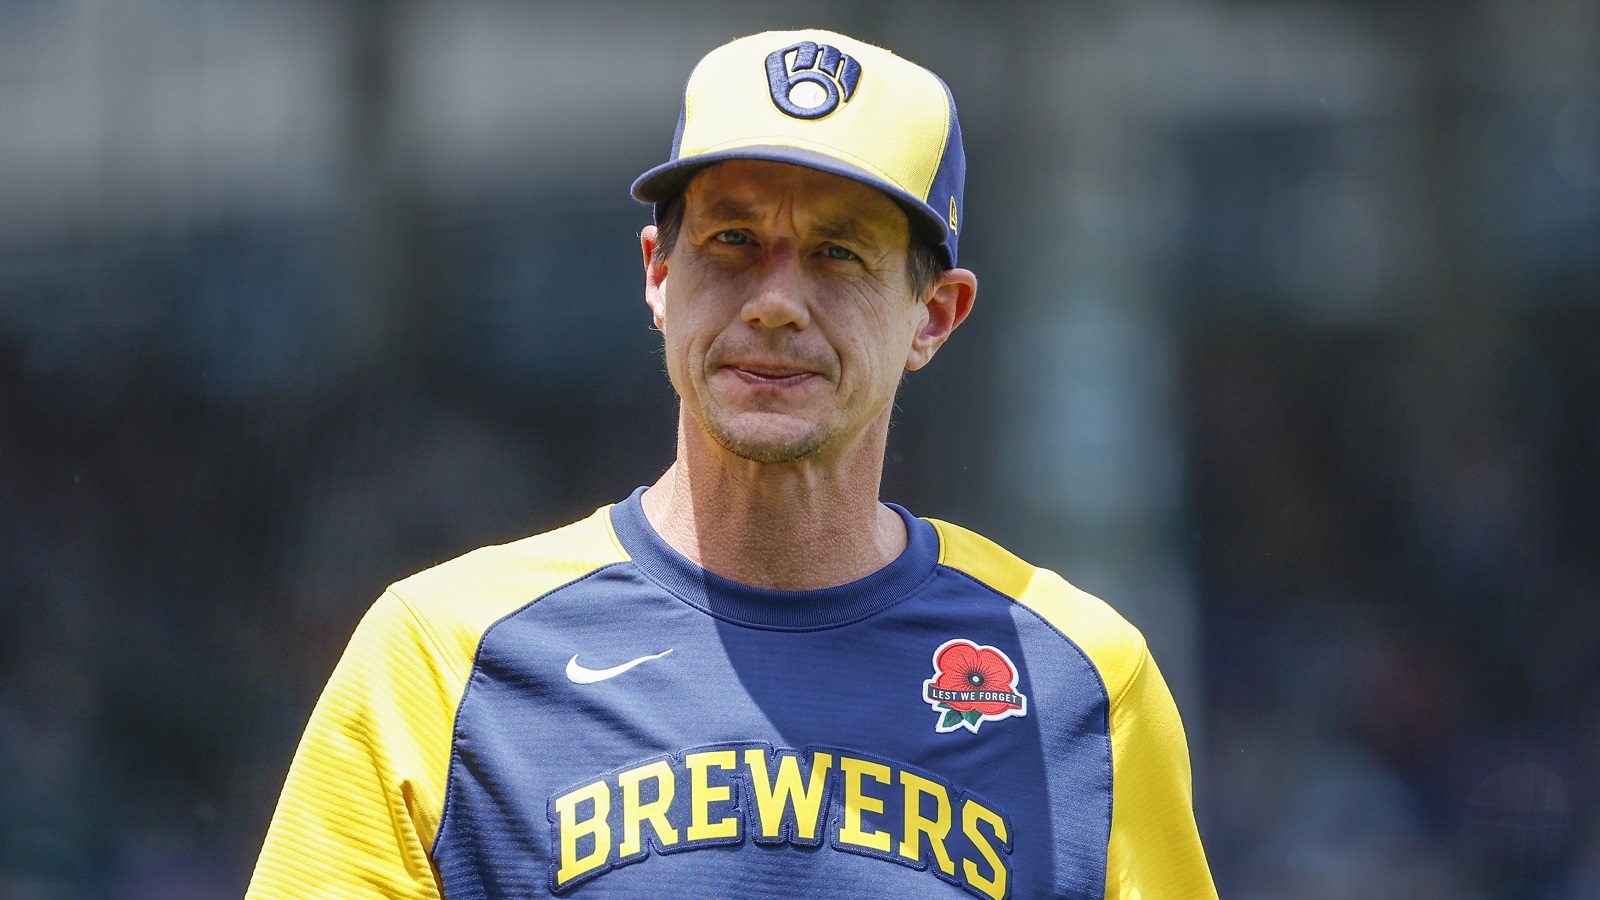 Brewers Manager Craig Counsell's Response to Diamondbacks' Win